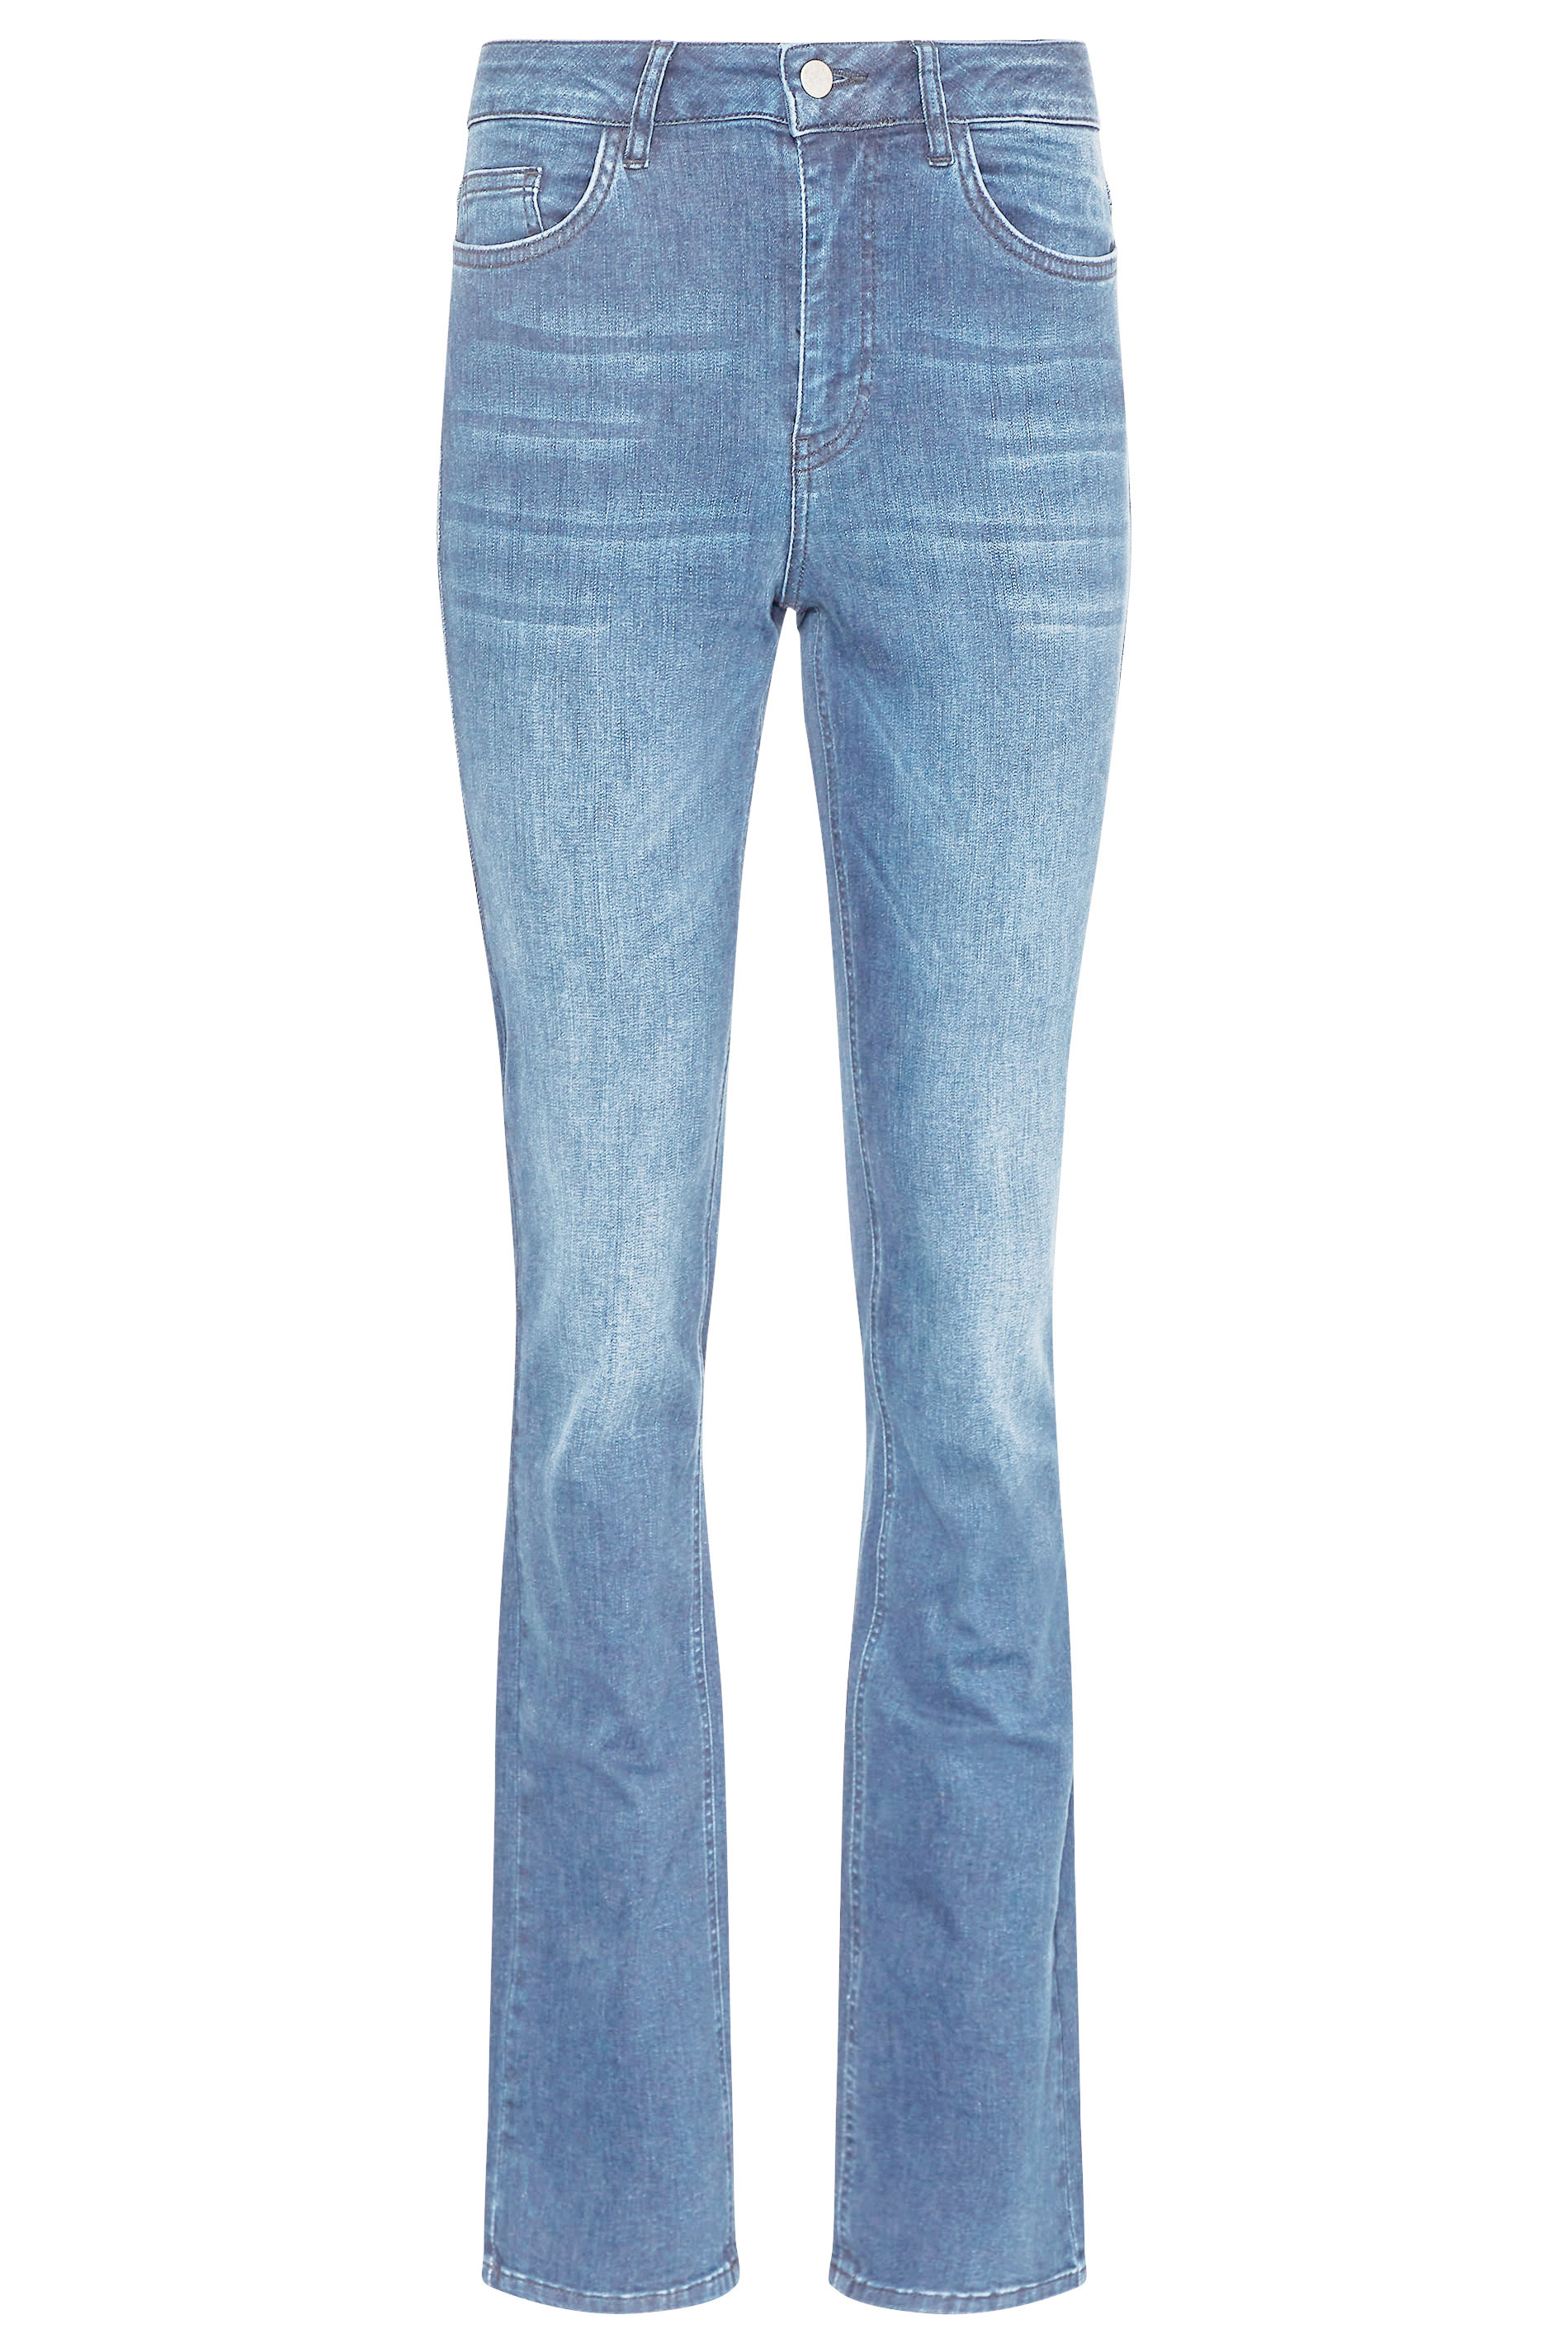 LTS MADE FOR GOOD Pacific Blue Straight Leg Jeans | Long Tall Sally 2